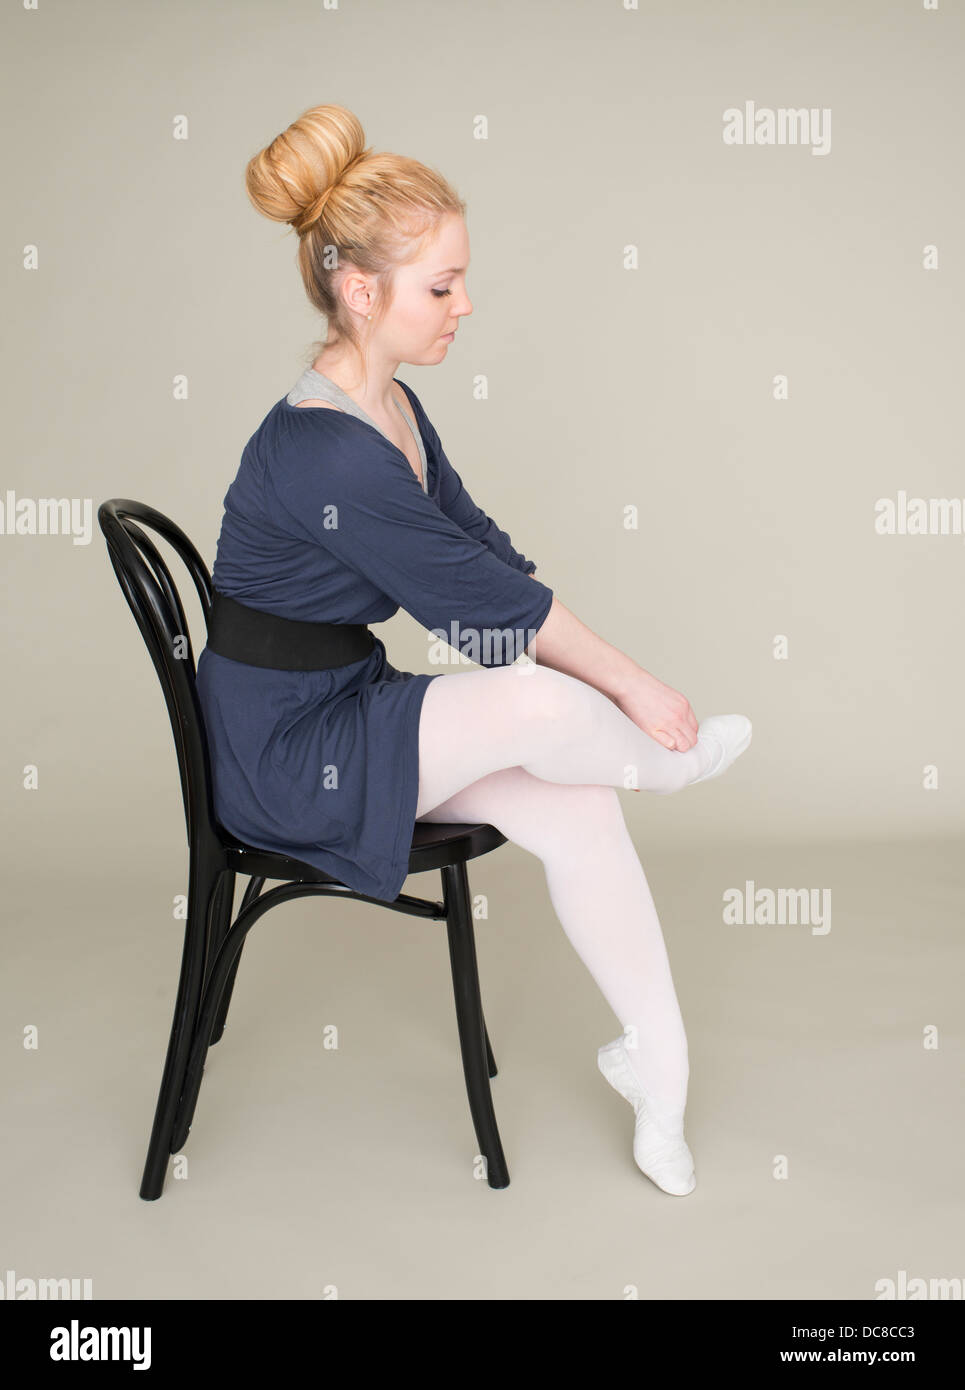 Young blond female teenager in ballet dress sitting on chair massaging foot Stock Photo